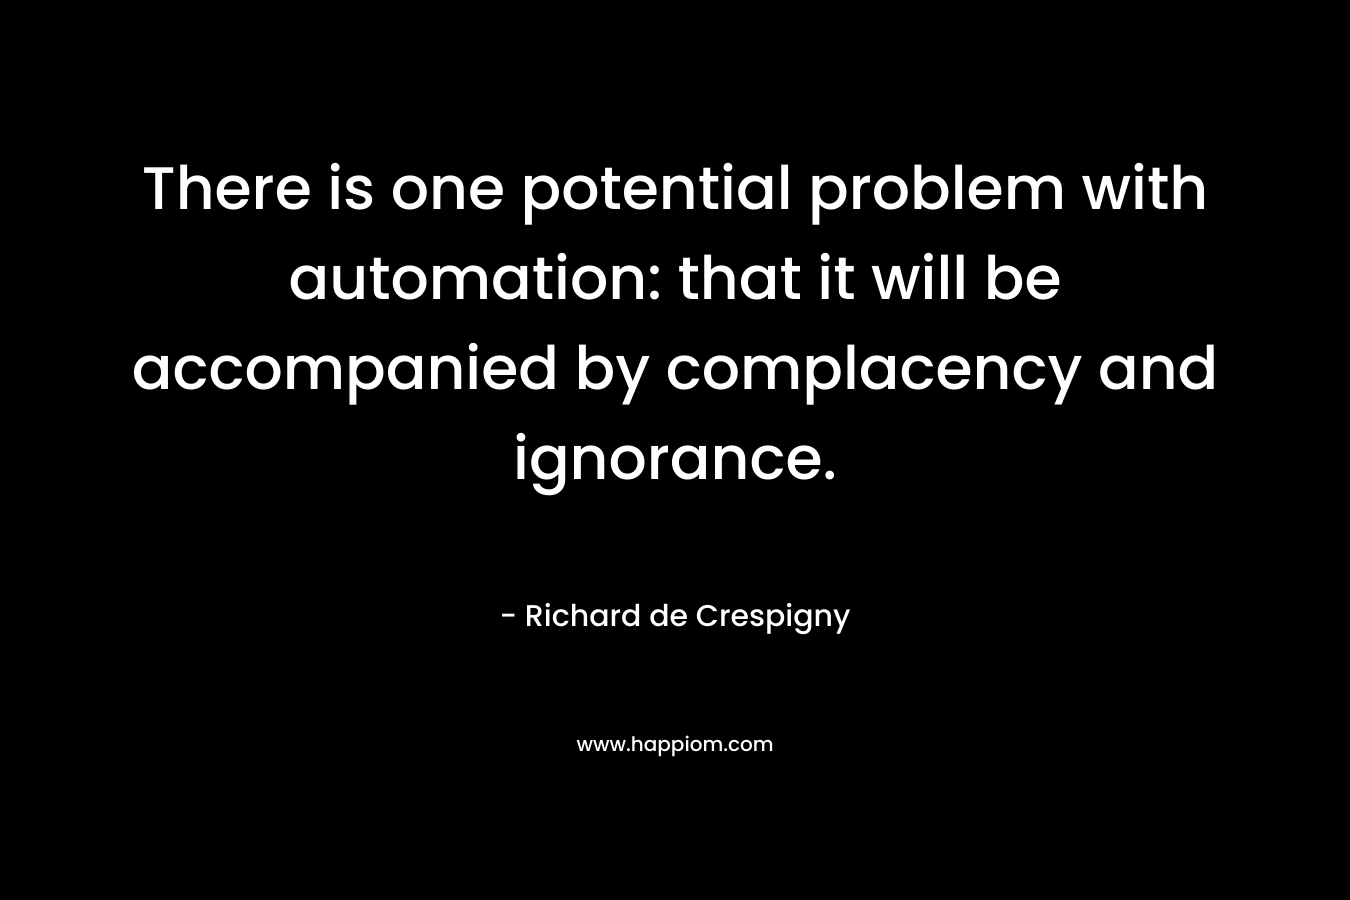 There is one potential problem with automation: that it will be accompanied by complacency and ignorance. – Richard de Crespigny